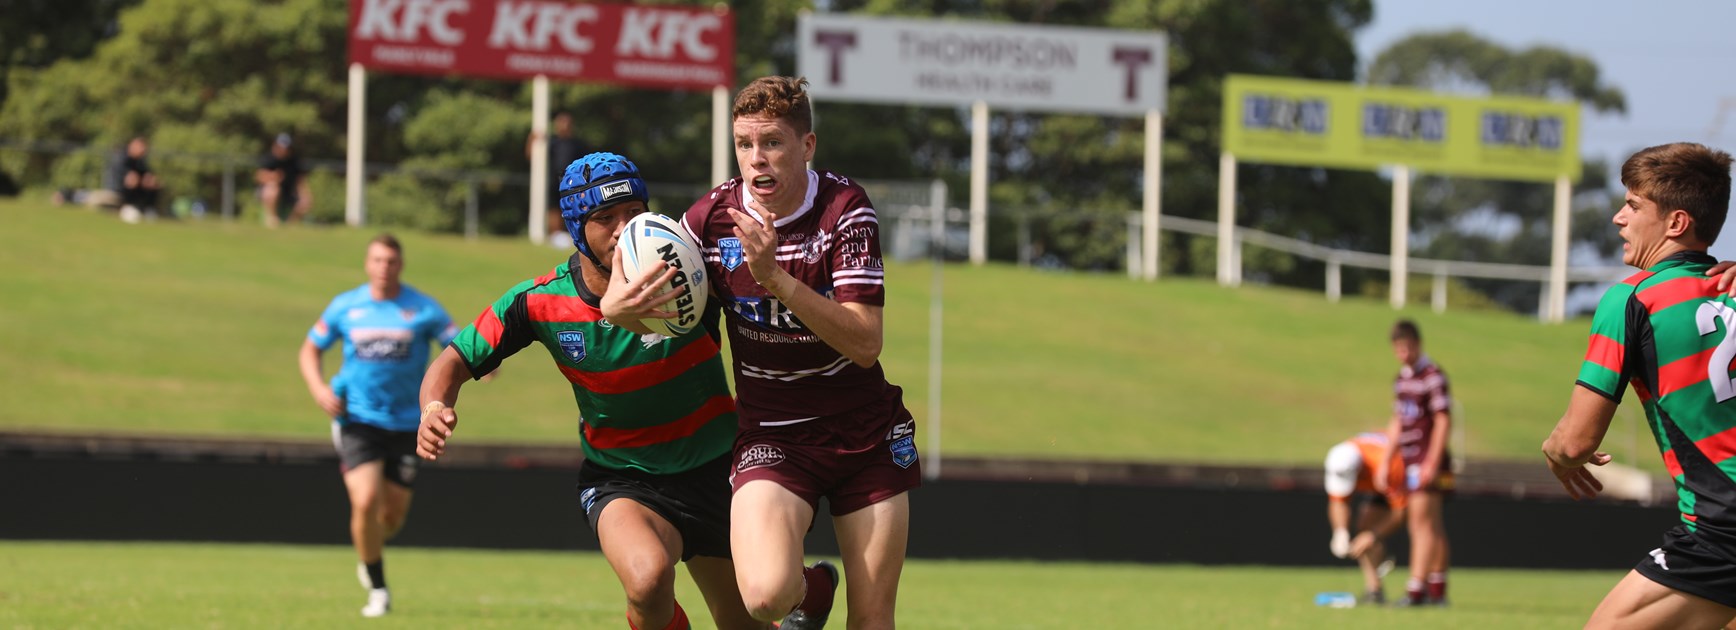 Sea Eagles lose to Souths in Harold Matthews finals